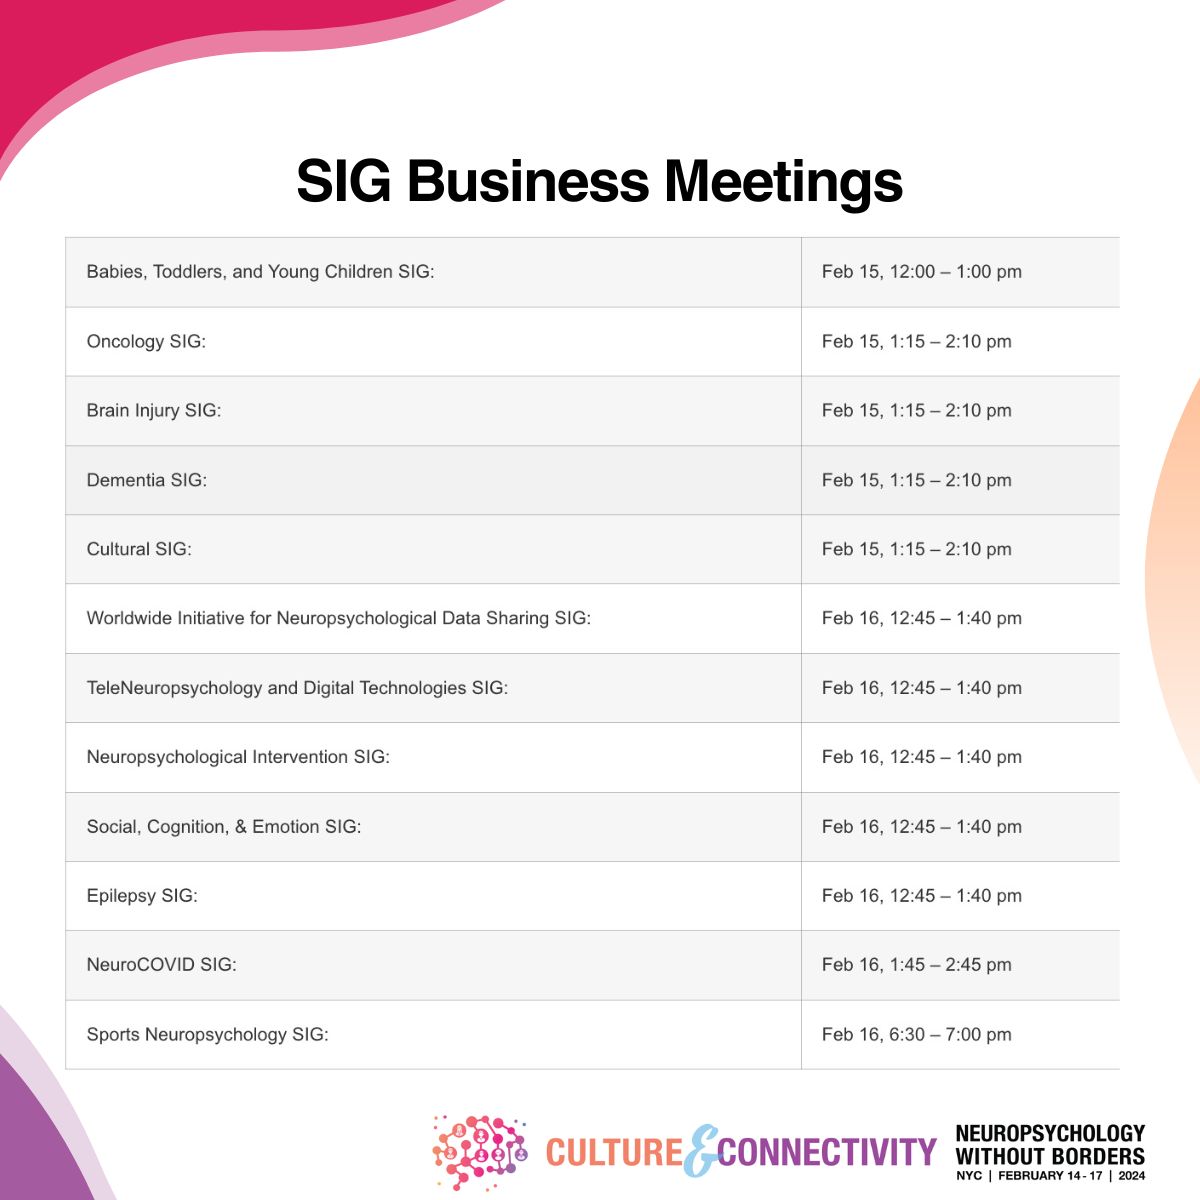 Planning your schedule for #INS2024inNYC? Don't forget to stop by a SIG business meeting to connect with like-minded colleagues!